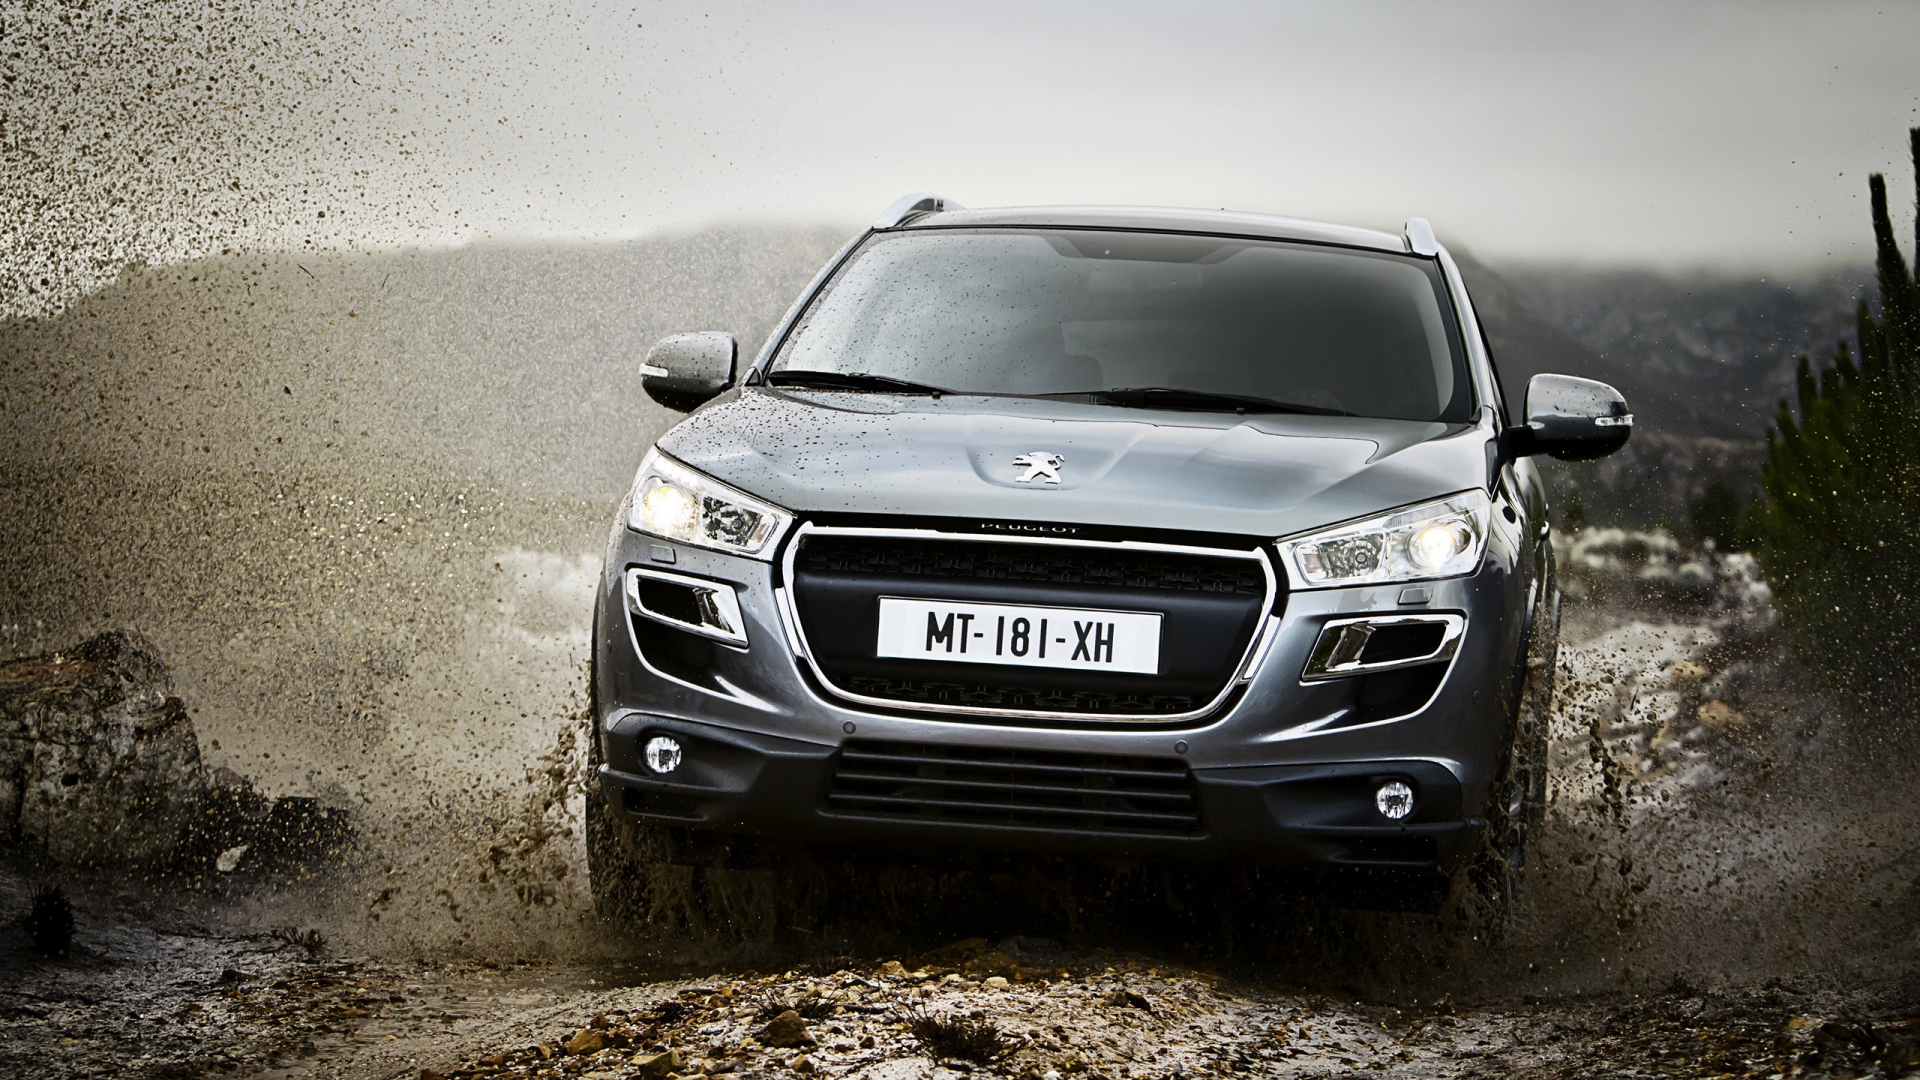 Angry Peugeot 4008 for 1920 x 1080 HDTV 1080p resolution